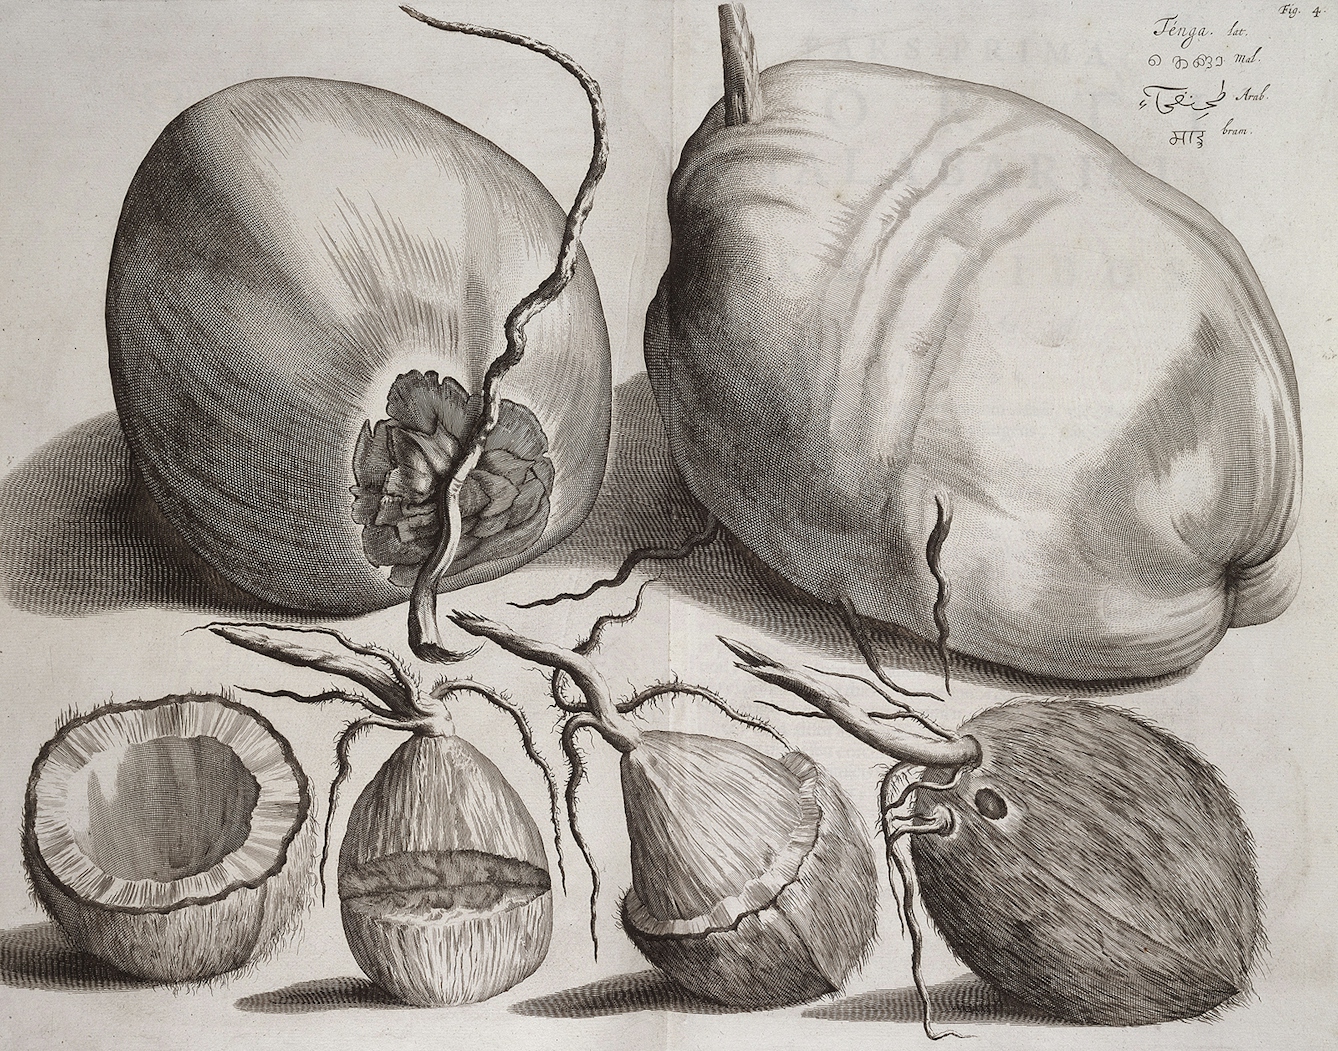 A black and white engraving showing several different views of a coconut.